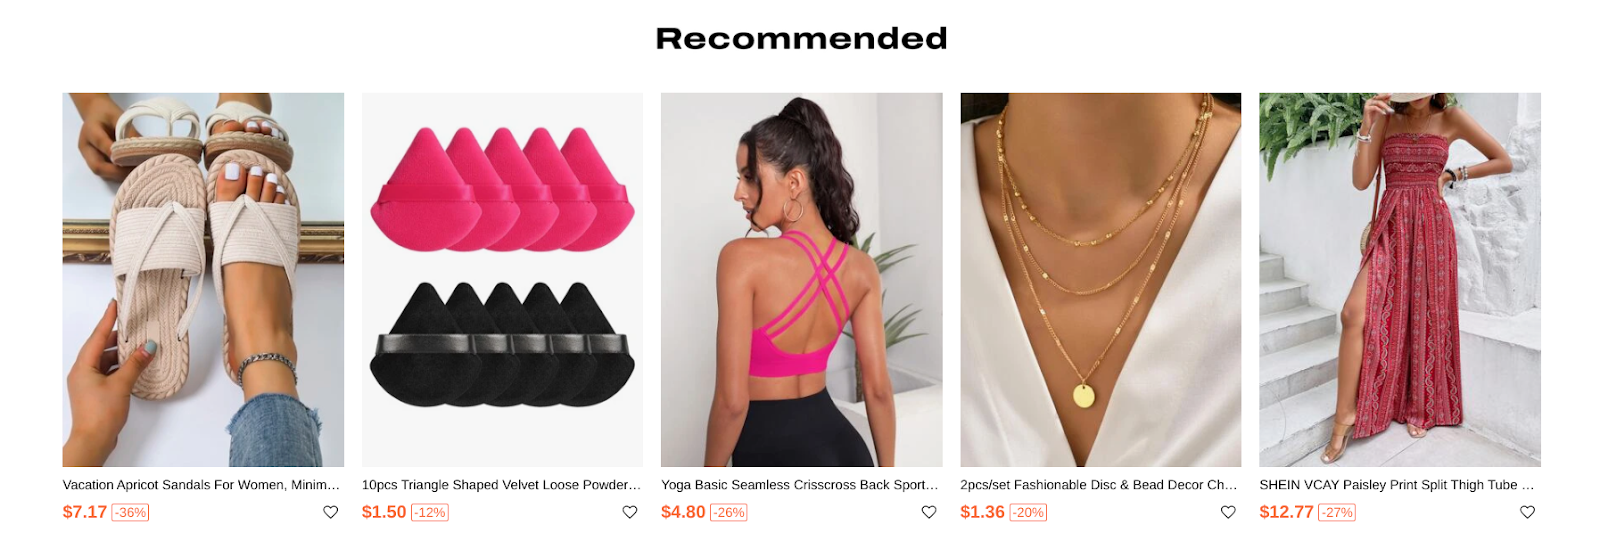 SHEIN recommended page